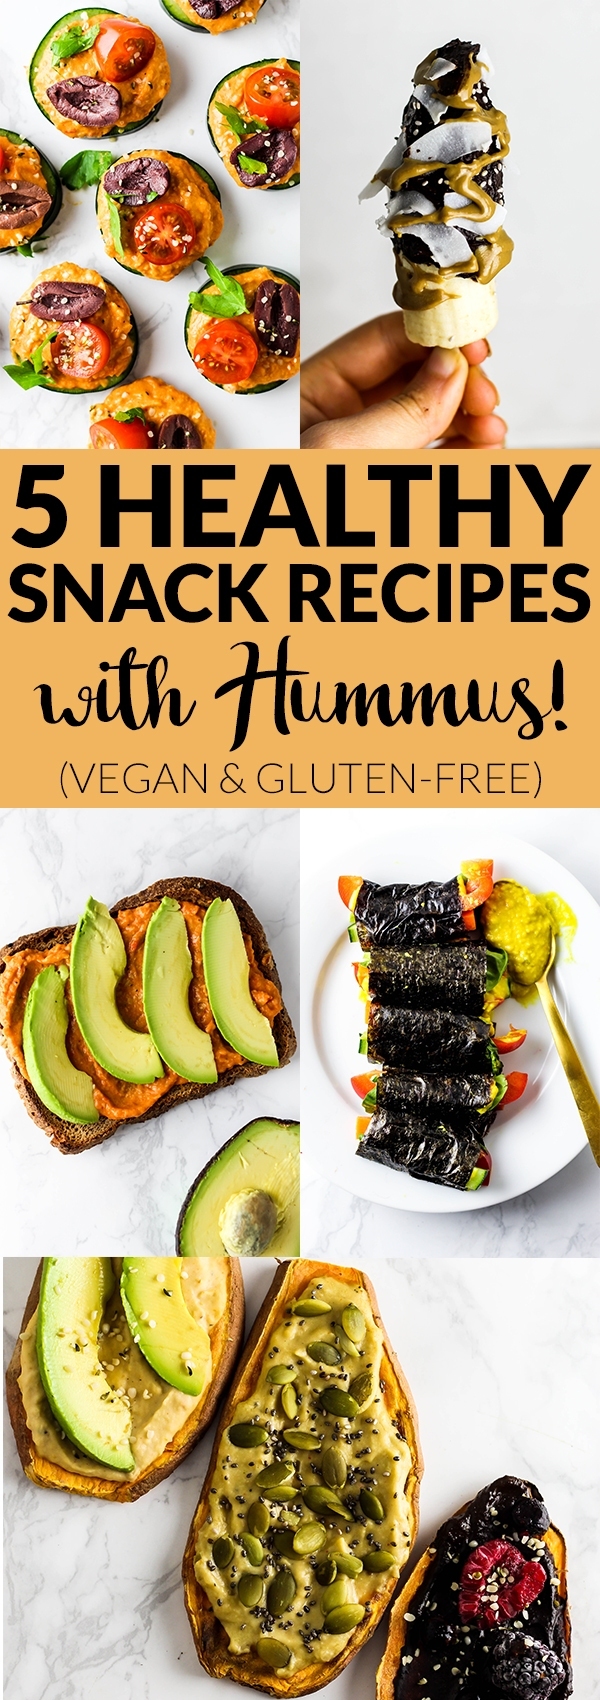 Take snacking to the next level with 5 healthy snack recipes made with hummus! From sweet to savory, these vegan & gluten-free recipes are sure to satisfy.